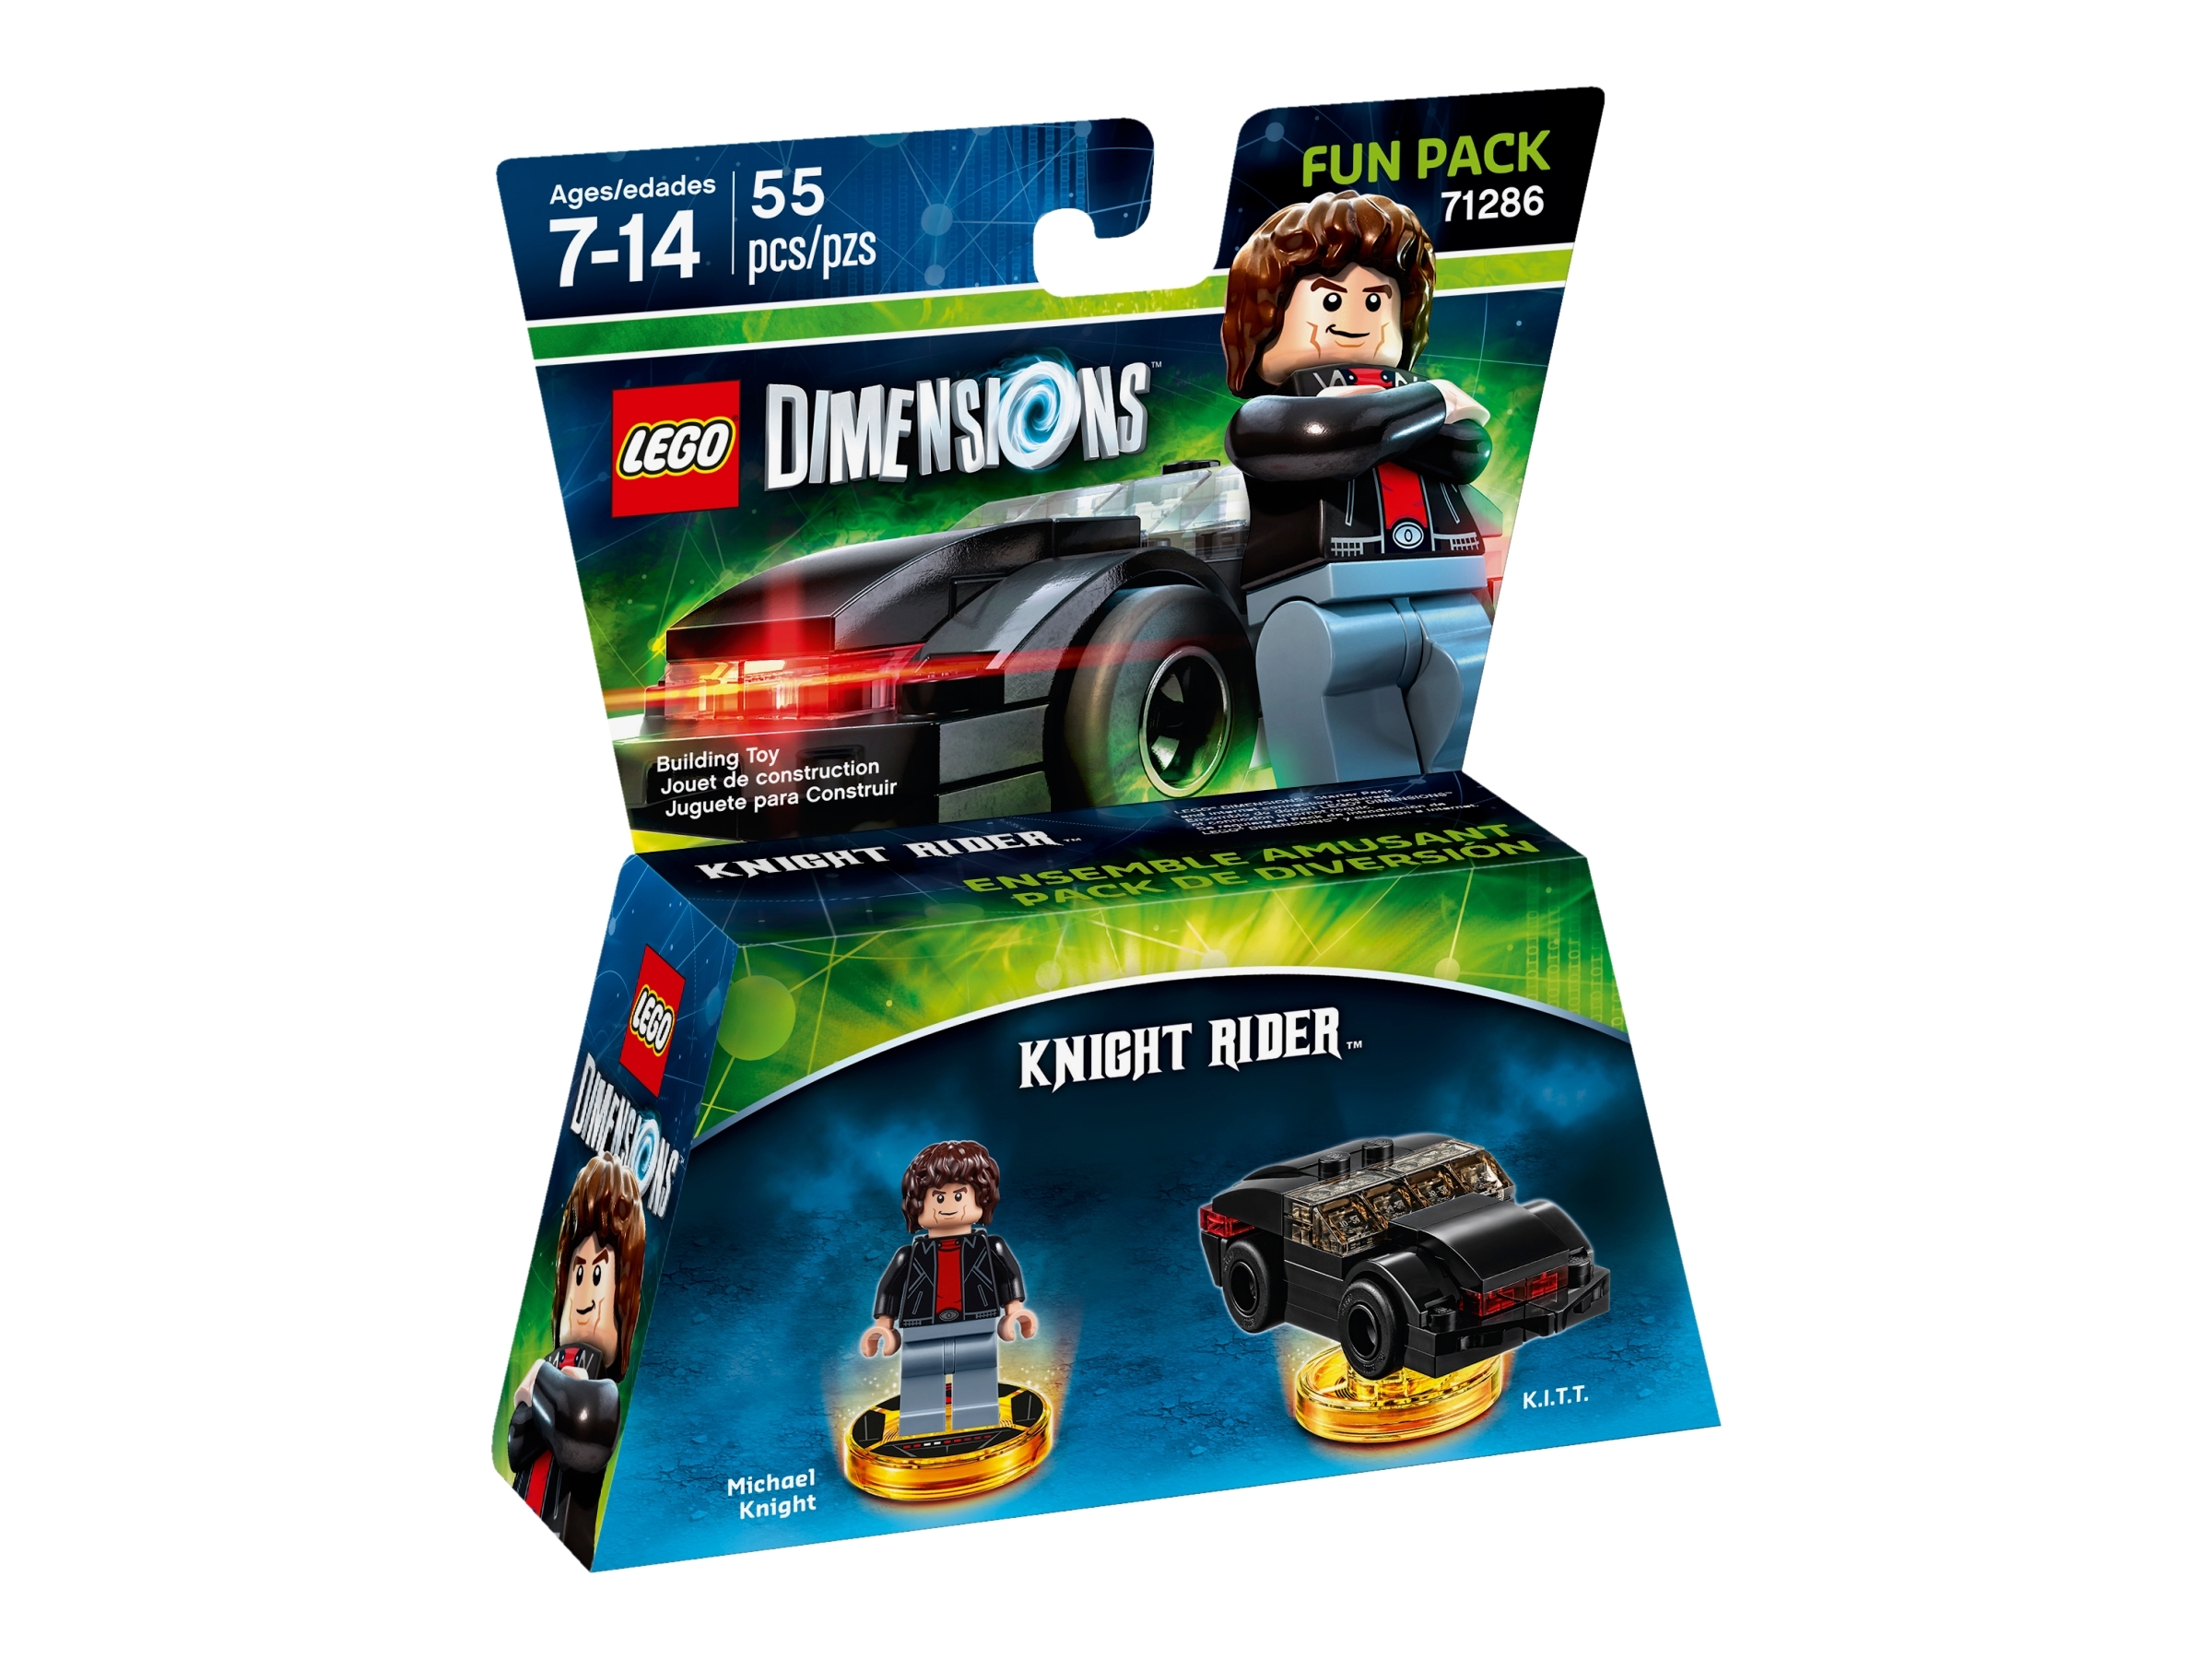 Knight Rider™ Fun Pack 71286 | DIMENSIONS™ | Buy online at the Official LEGO® Shop